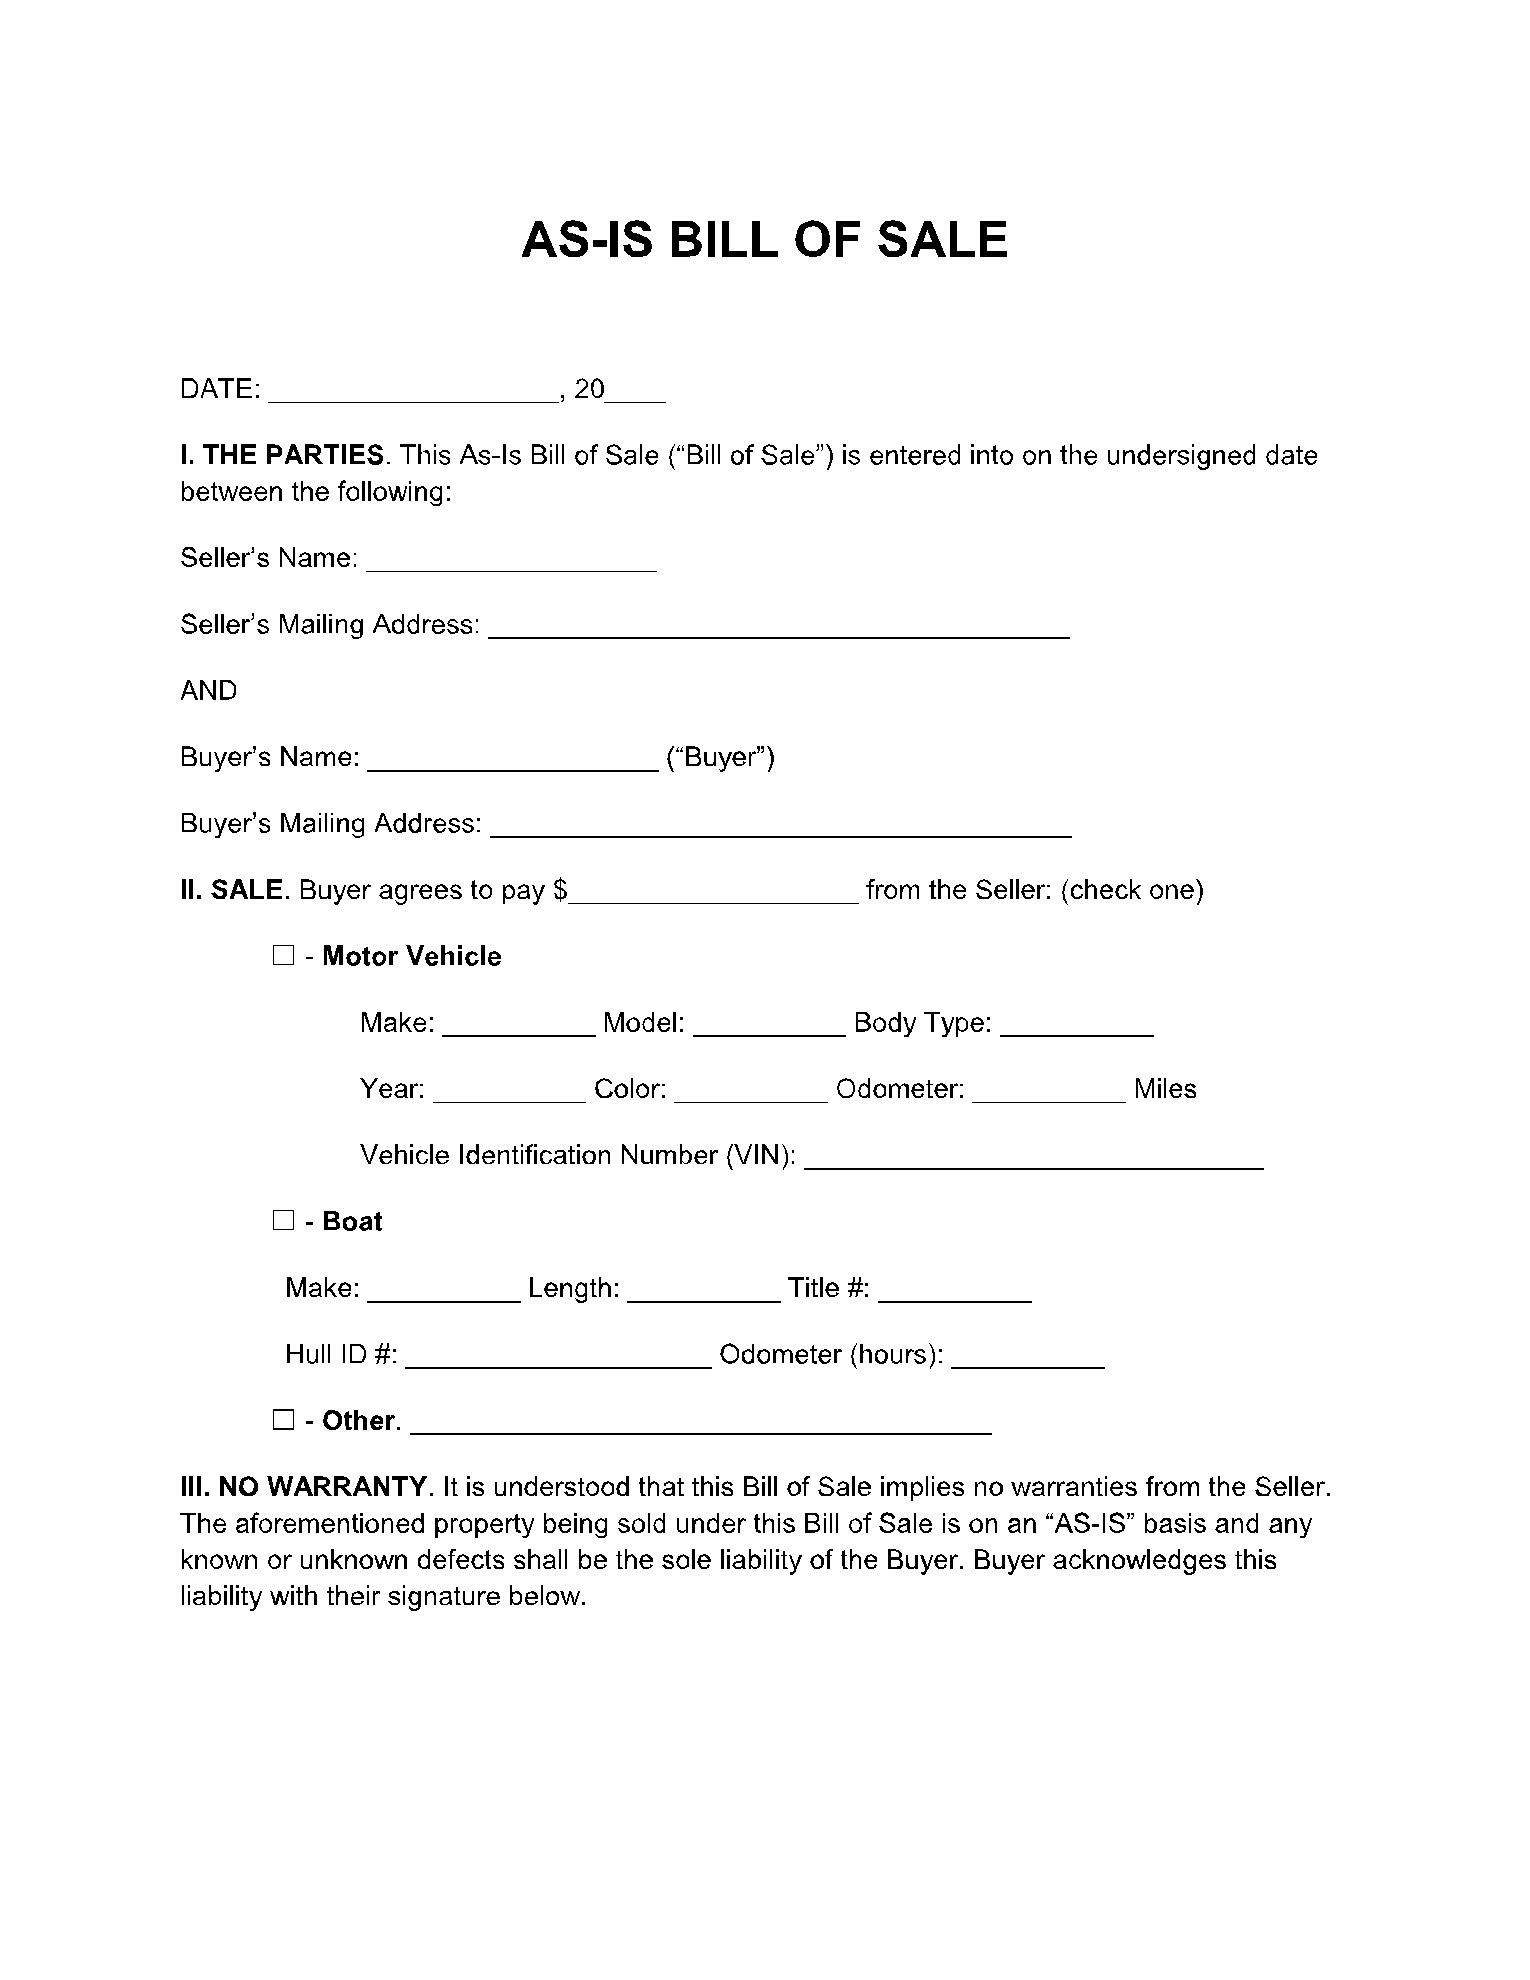 As-Is Bill of Sale Template